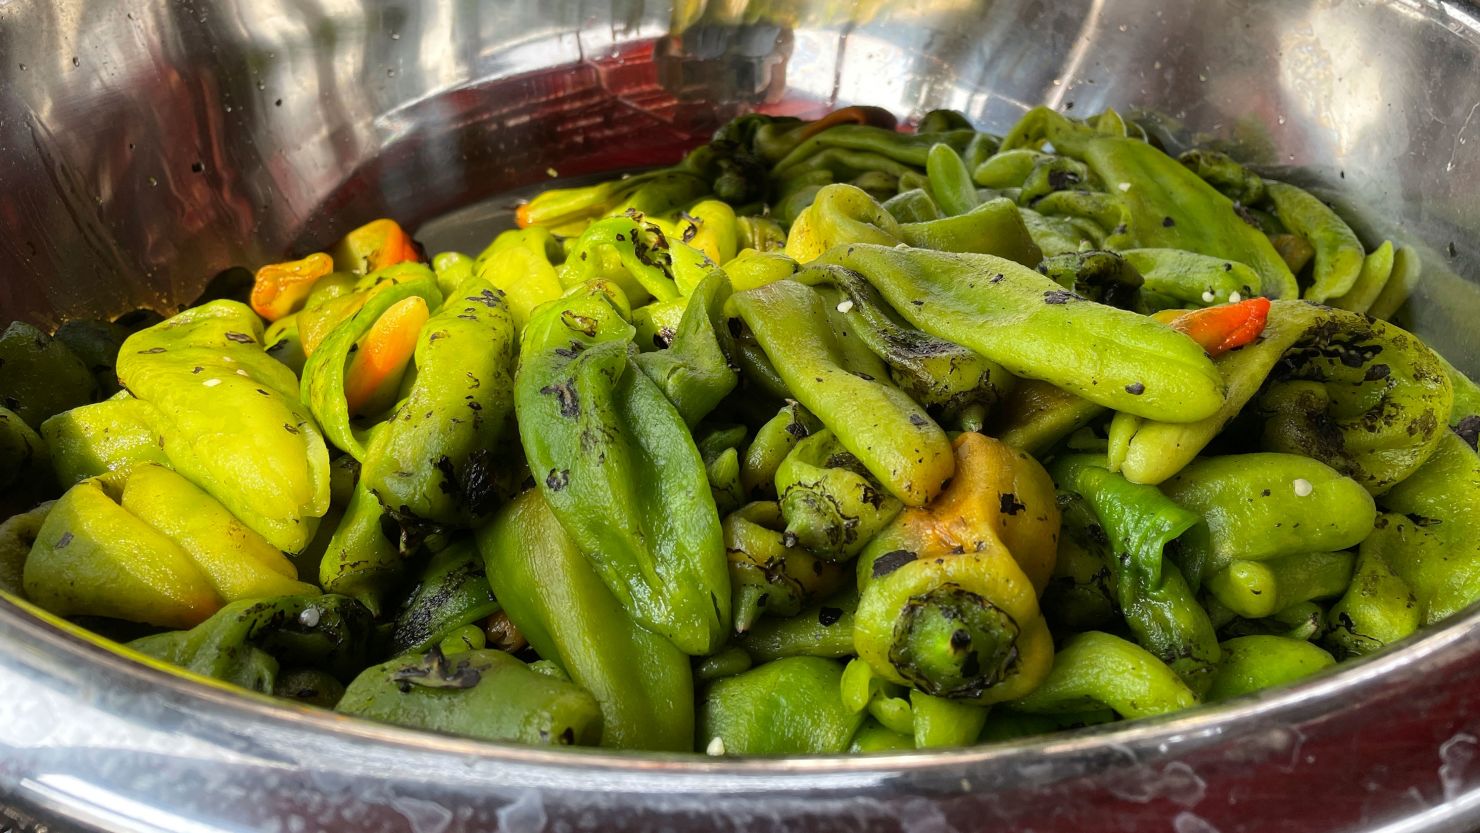 A large bowl of roasted green chile at a market in Hatch, New Mexico. Democratic Sen. Bill Soules is proposing that this scent become the official state aroma.